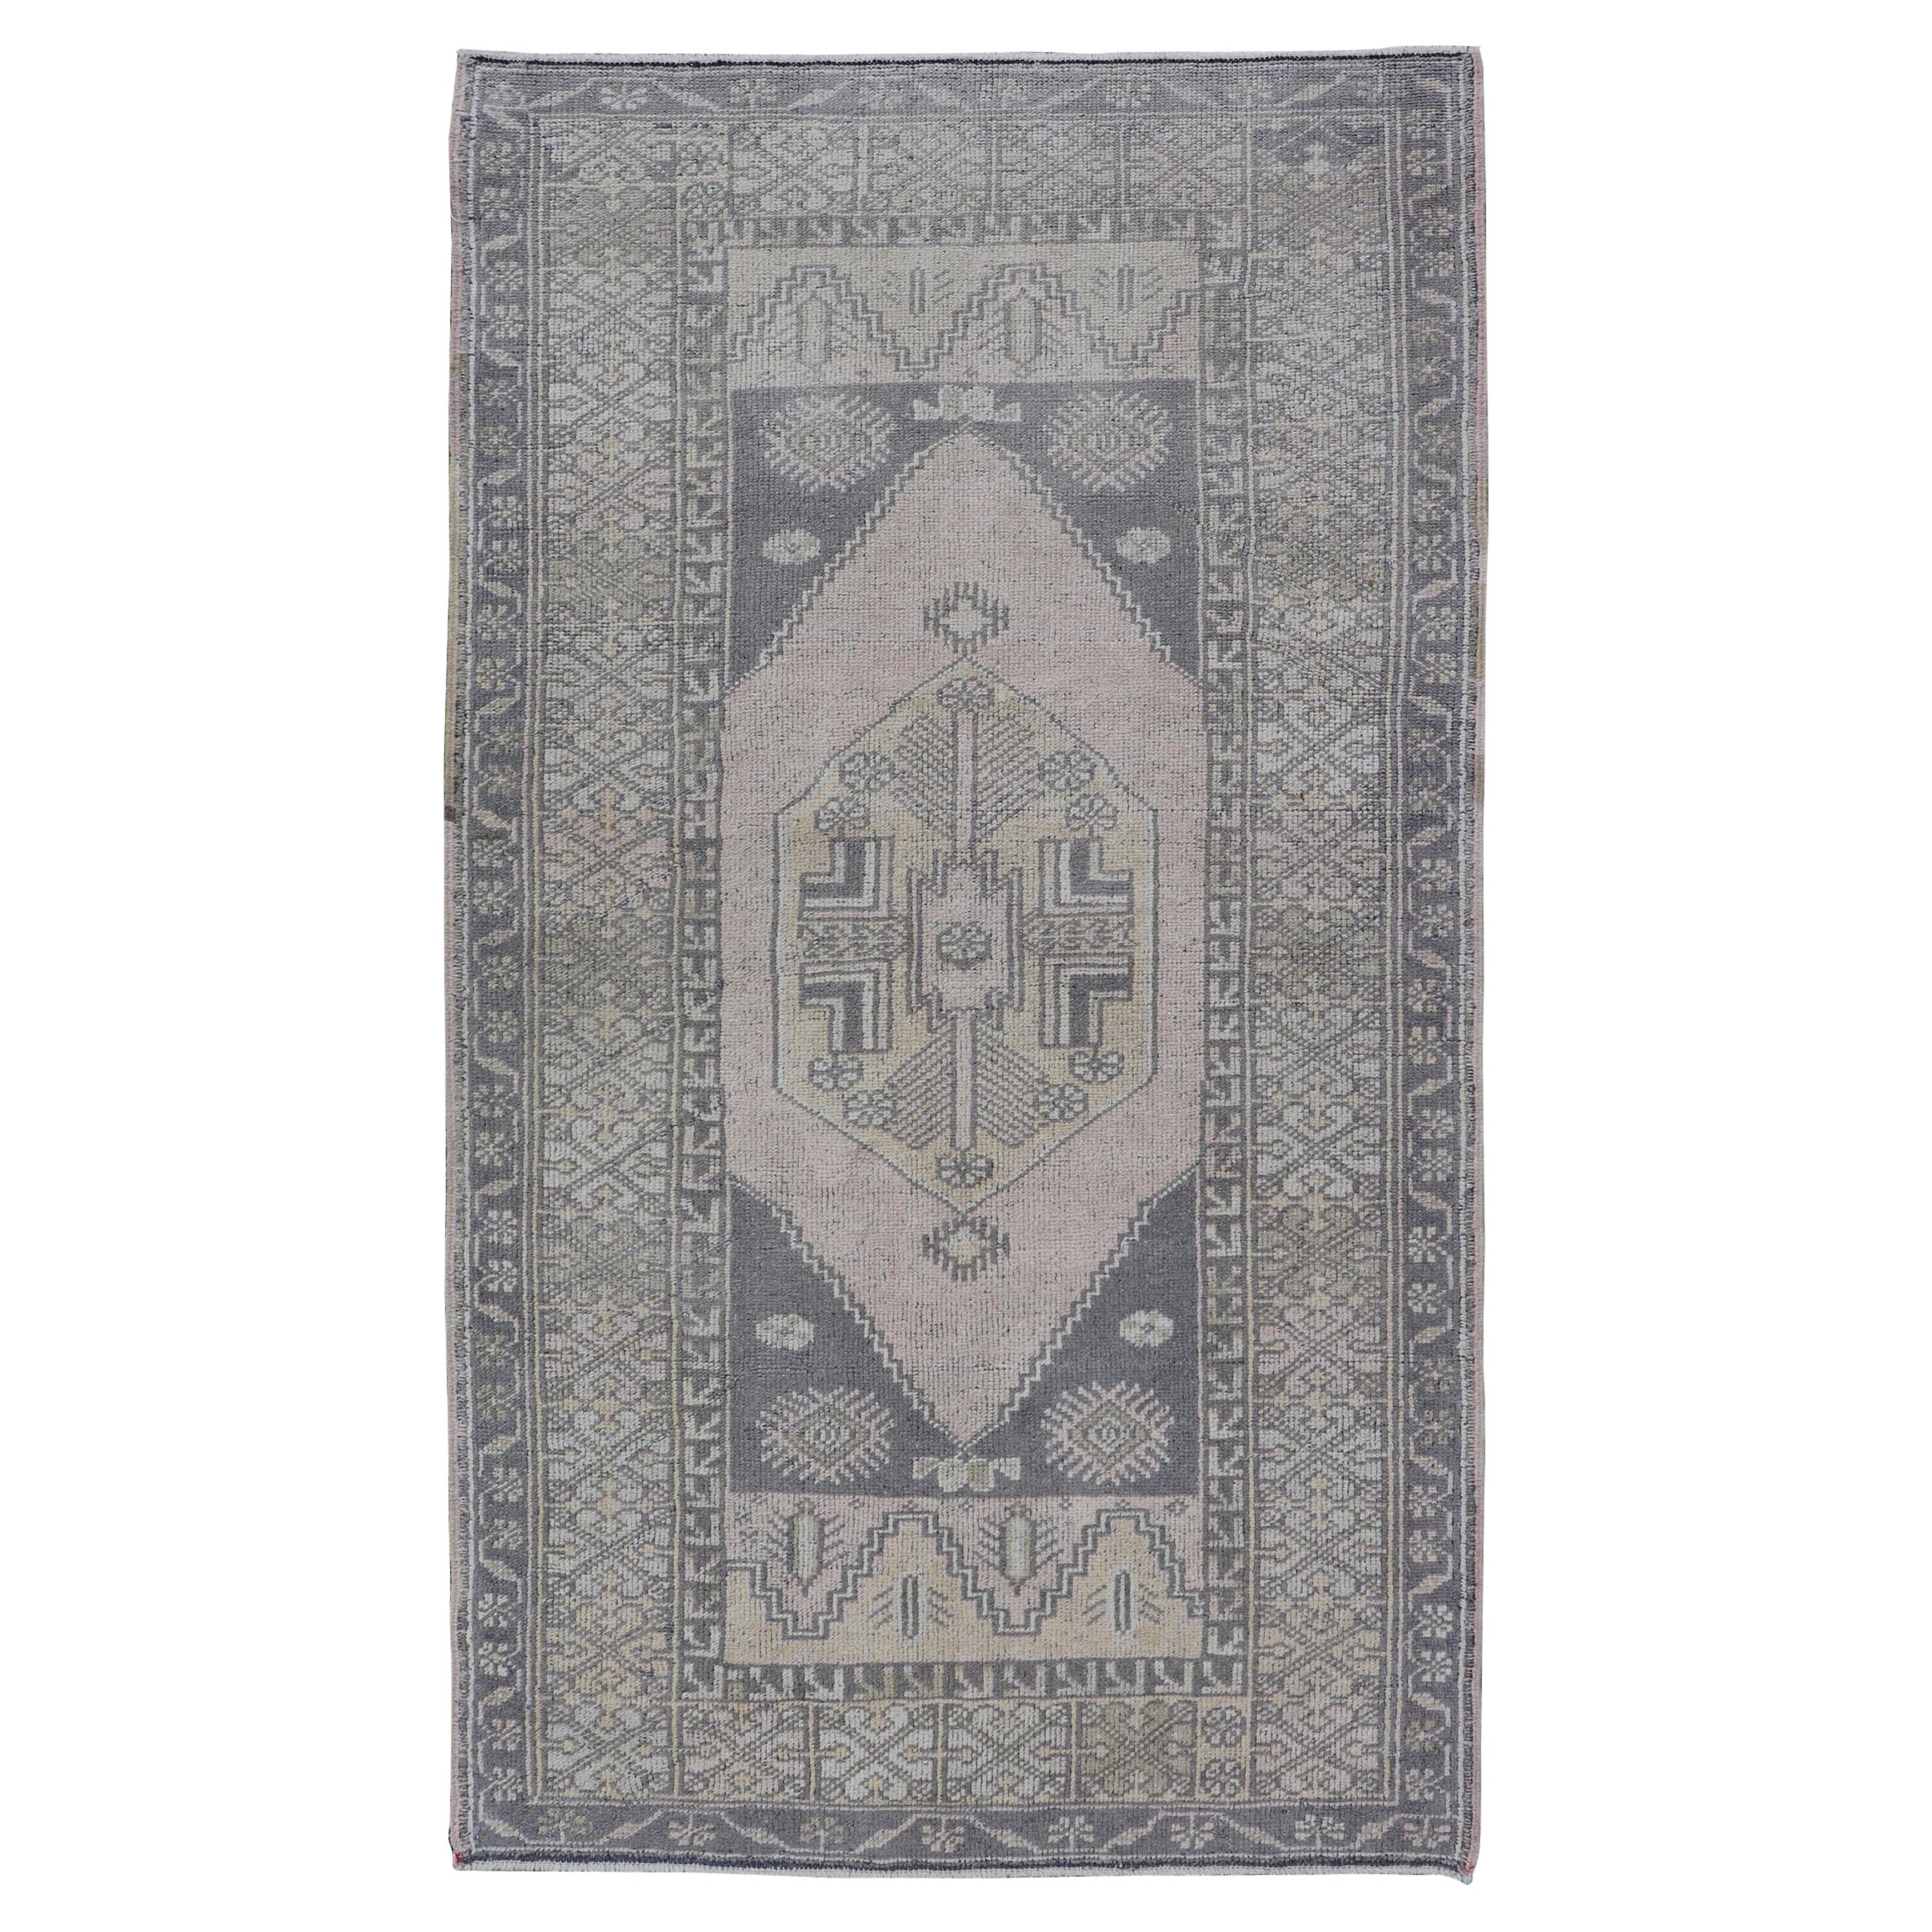 Turkish Vintage Oushak Rug in Muted Taupe, Gray, Cream, and Blush